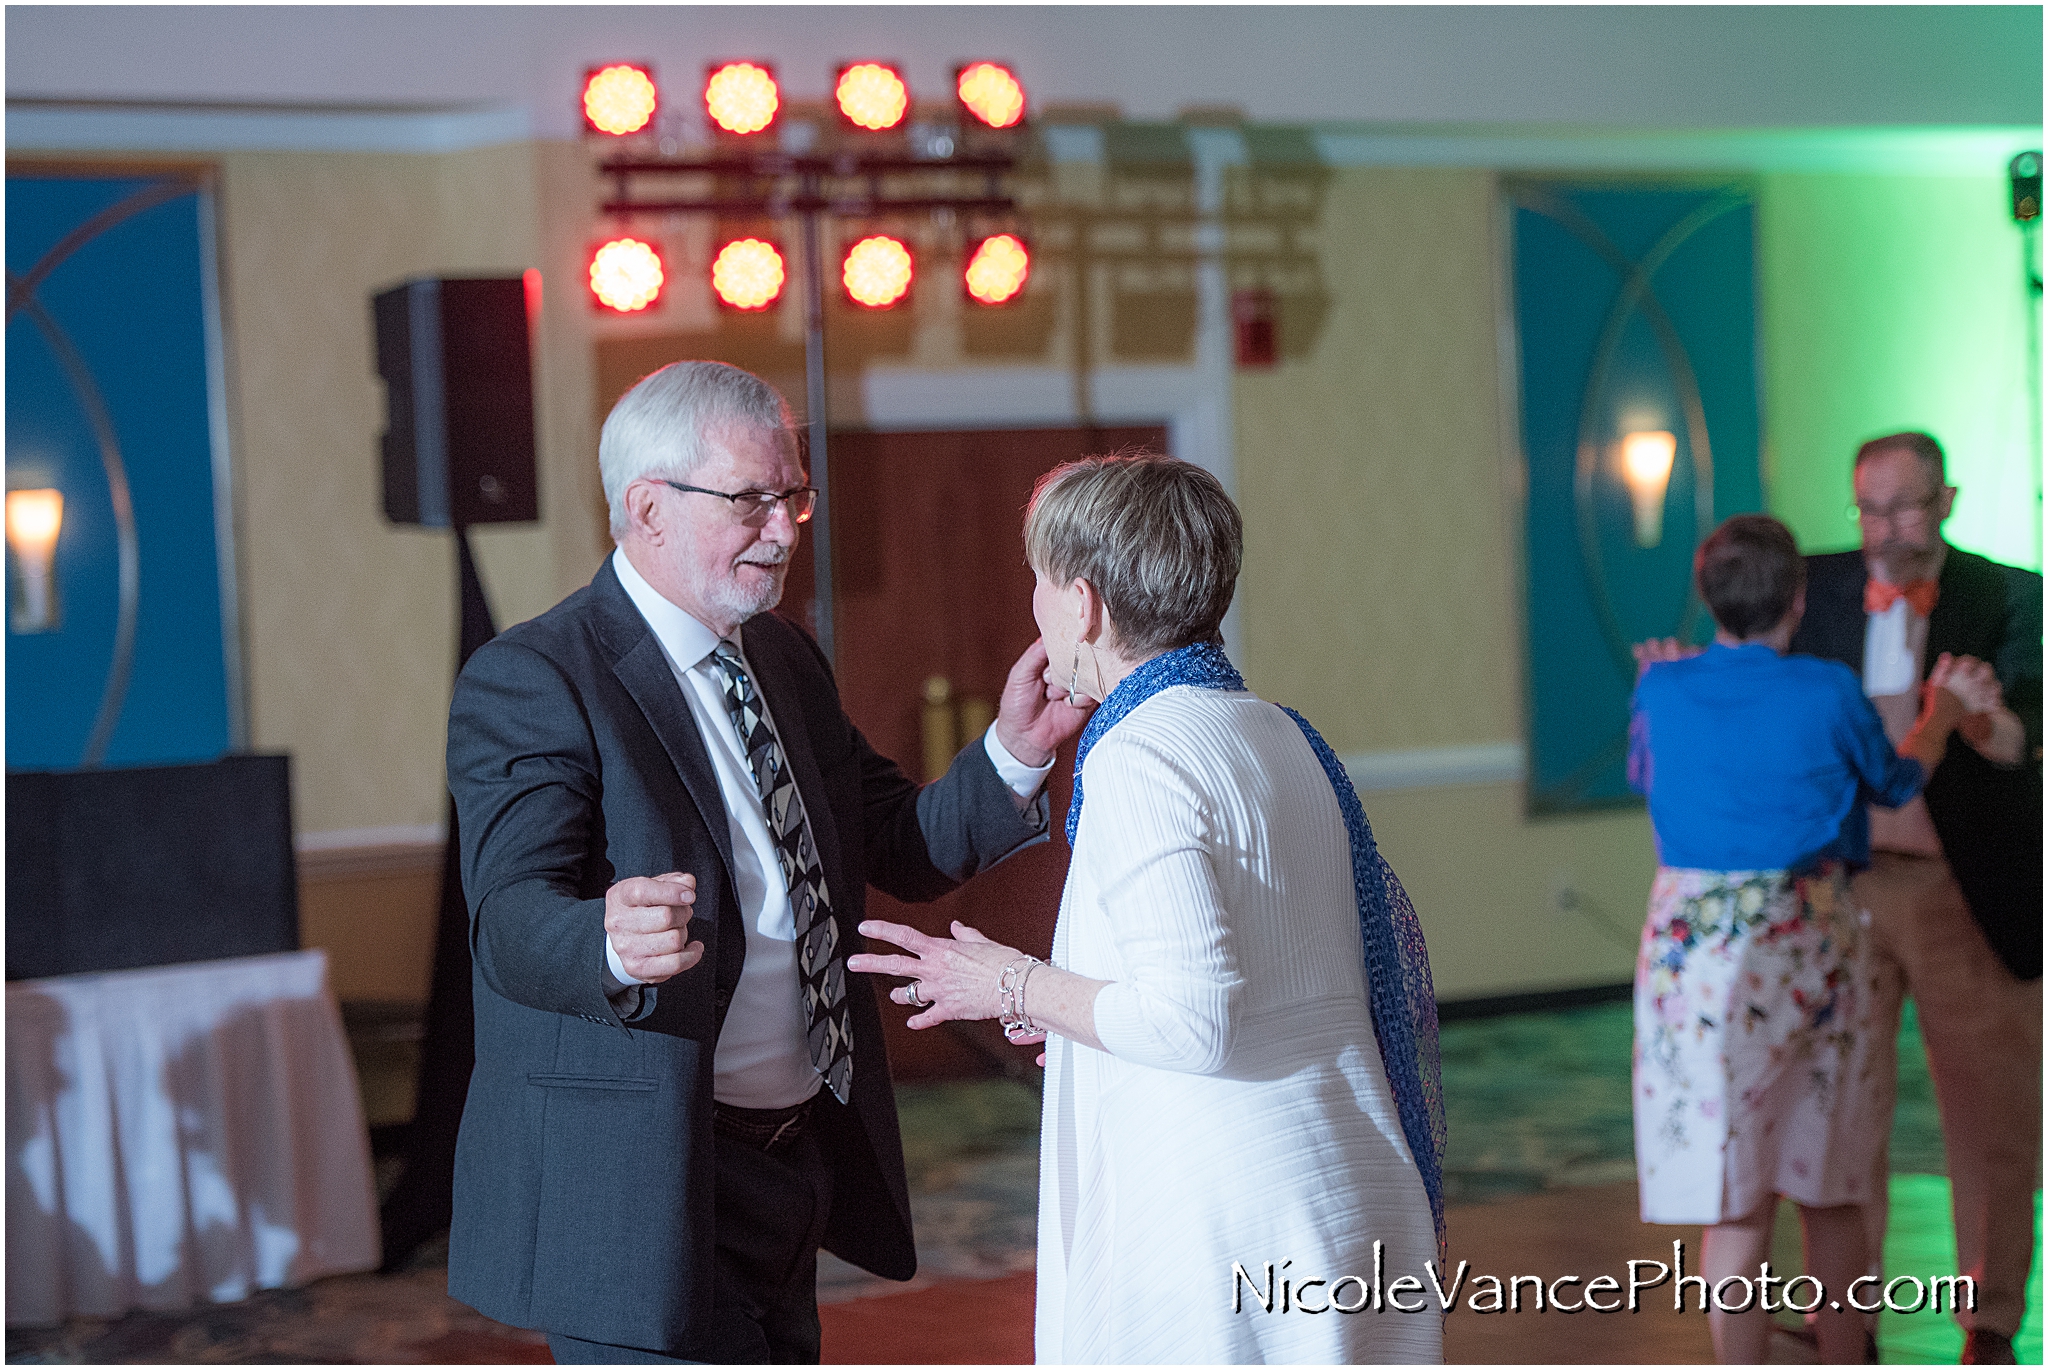 Wedding guests enjoy the reception at the ballroom at the Doubletree by Hilton Richmond-Midlothian.